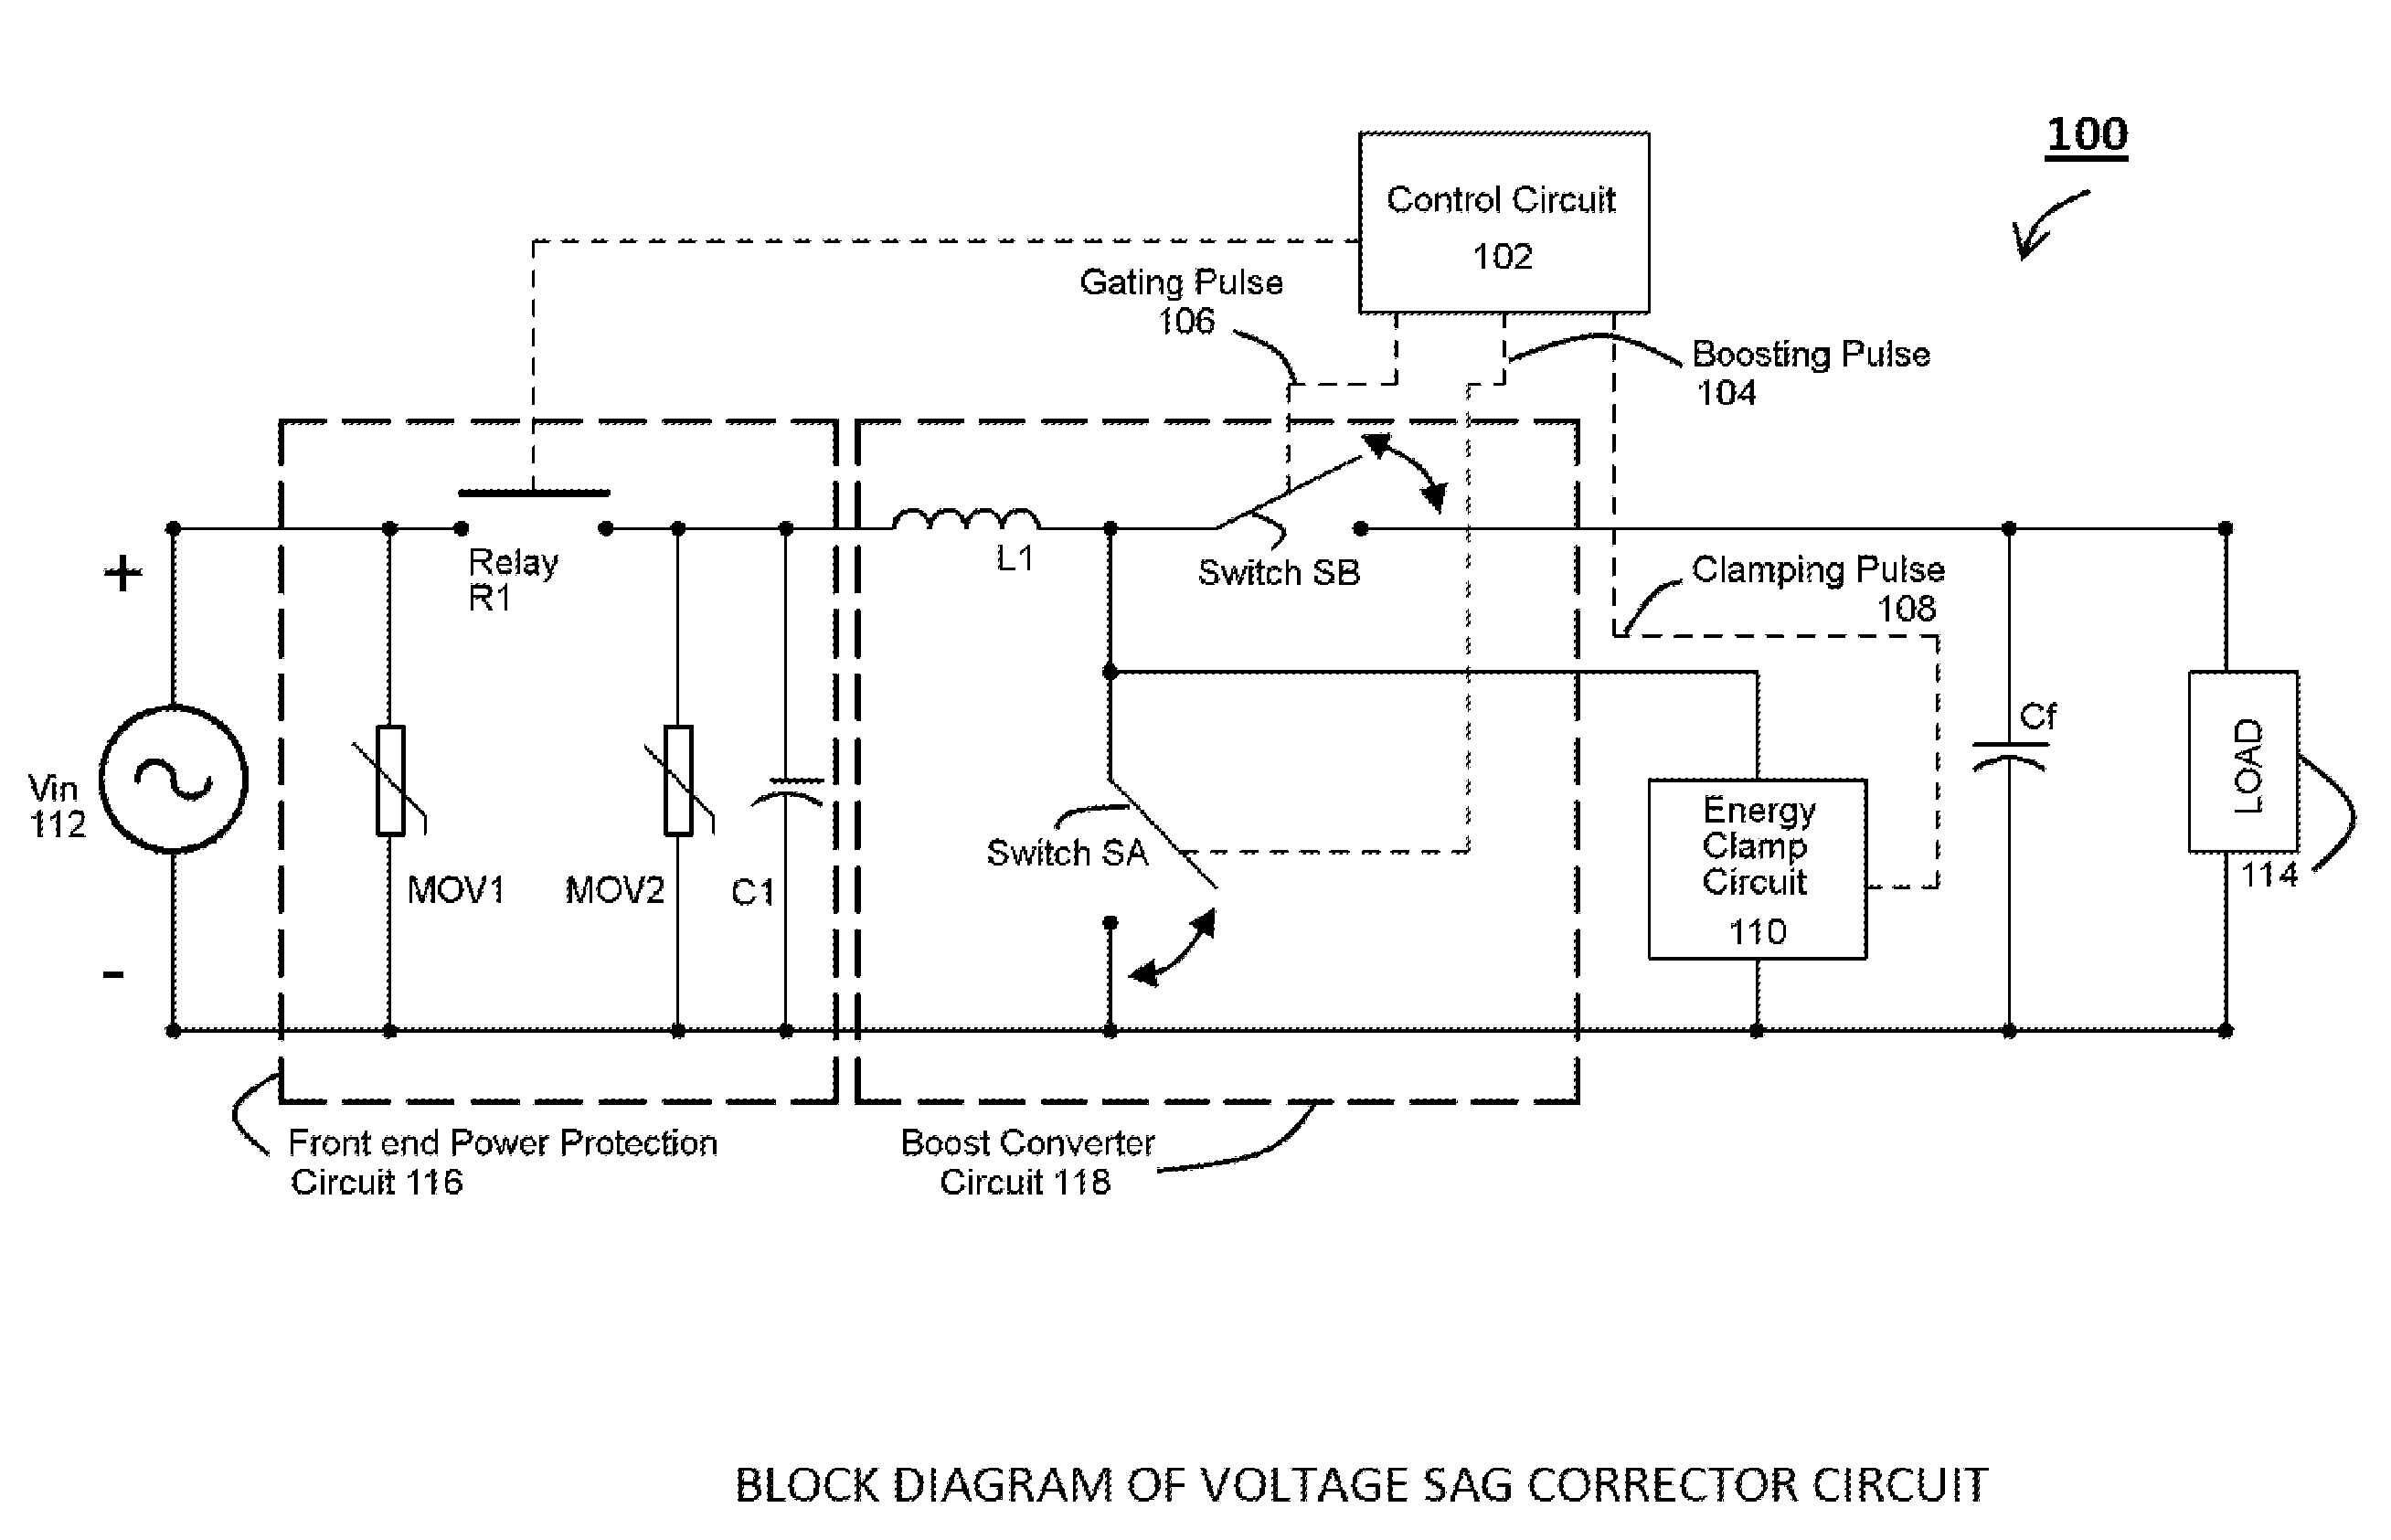 Voltage Sag Corrector Using a Variable Duty Cycle Boost Converter